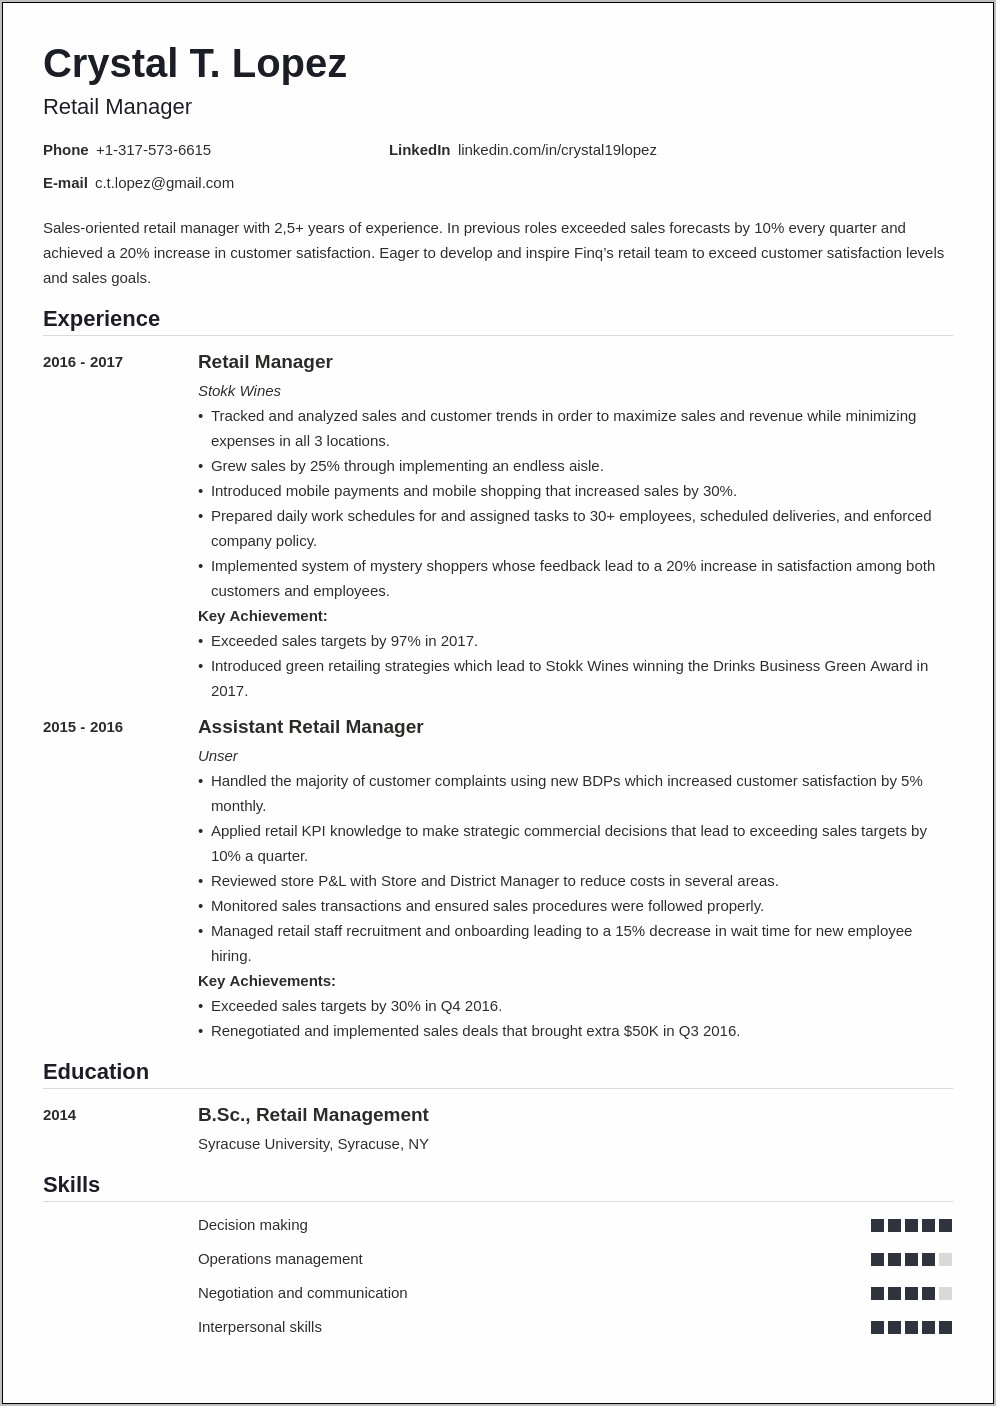 Shopping Center Operations Manager Resume